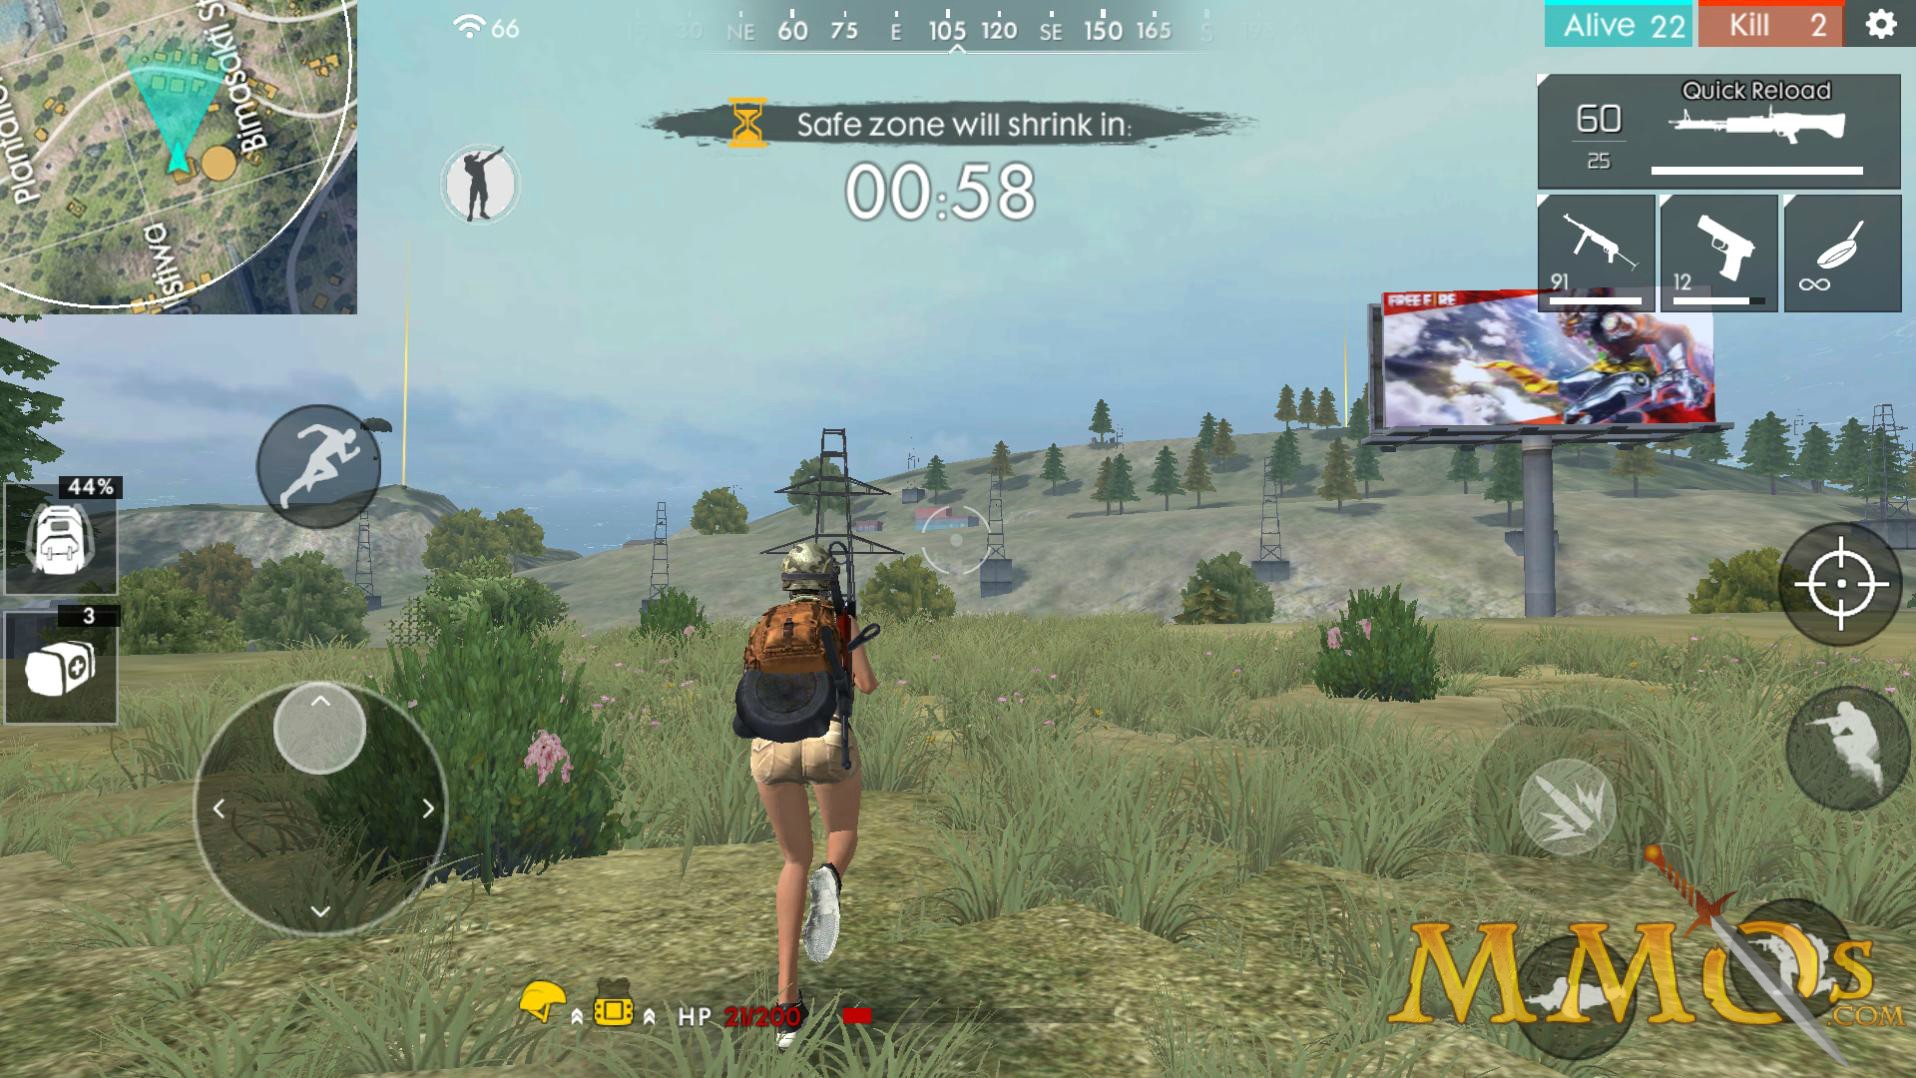 FREE FIRE BEST GAMEPLAY, GARENA FREE FIRE GAME, FREE FIRE - Any Gamers